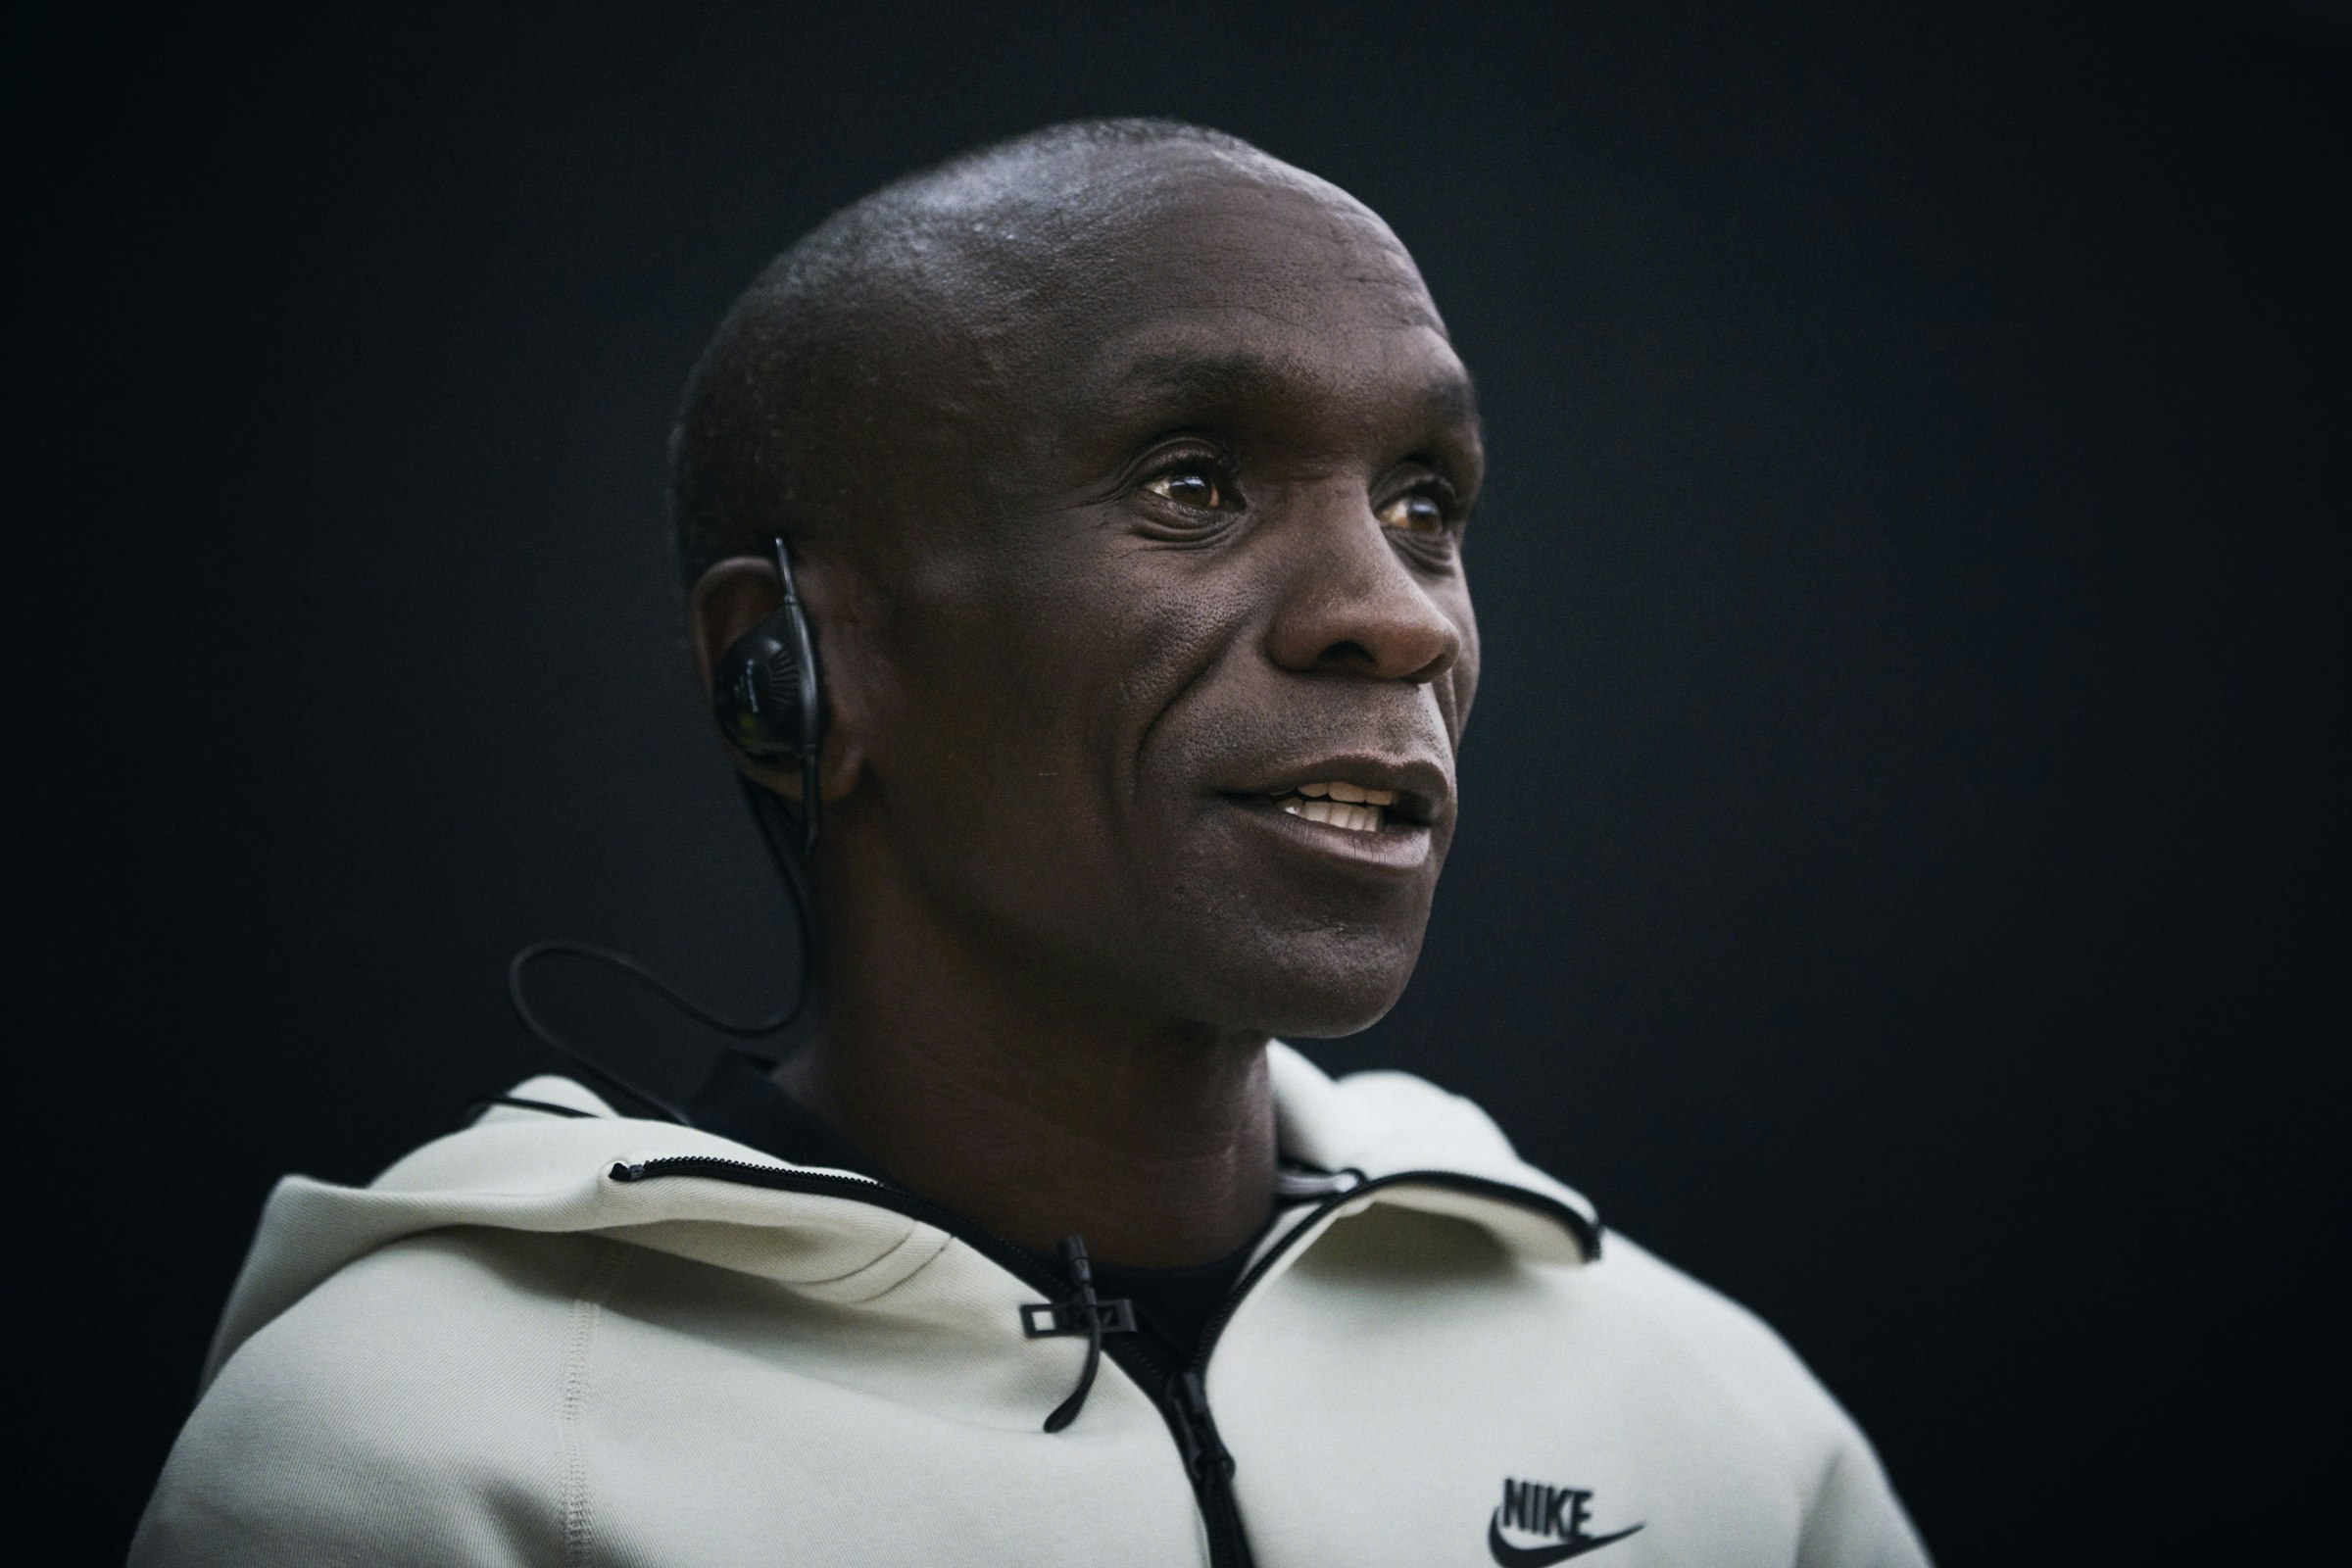 Kipchoge tested about six pairs of prototype shoes in the two months leading up to the Tokyo Marathon